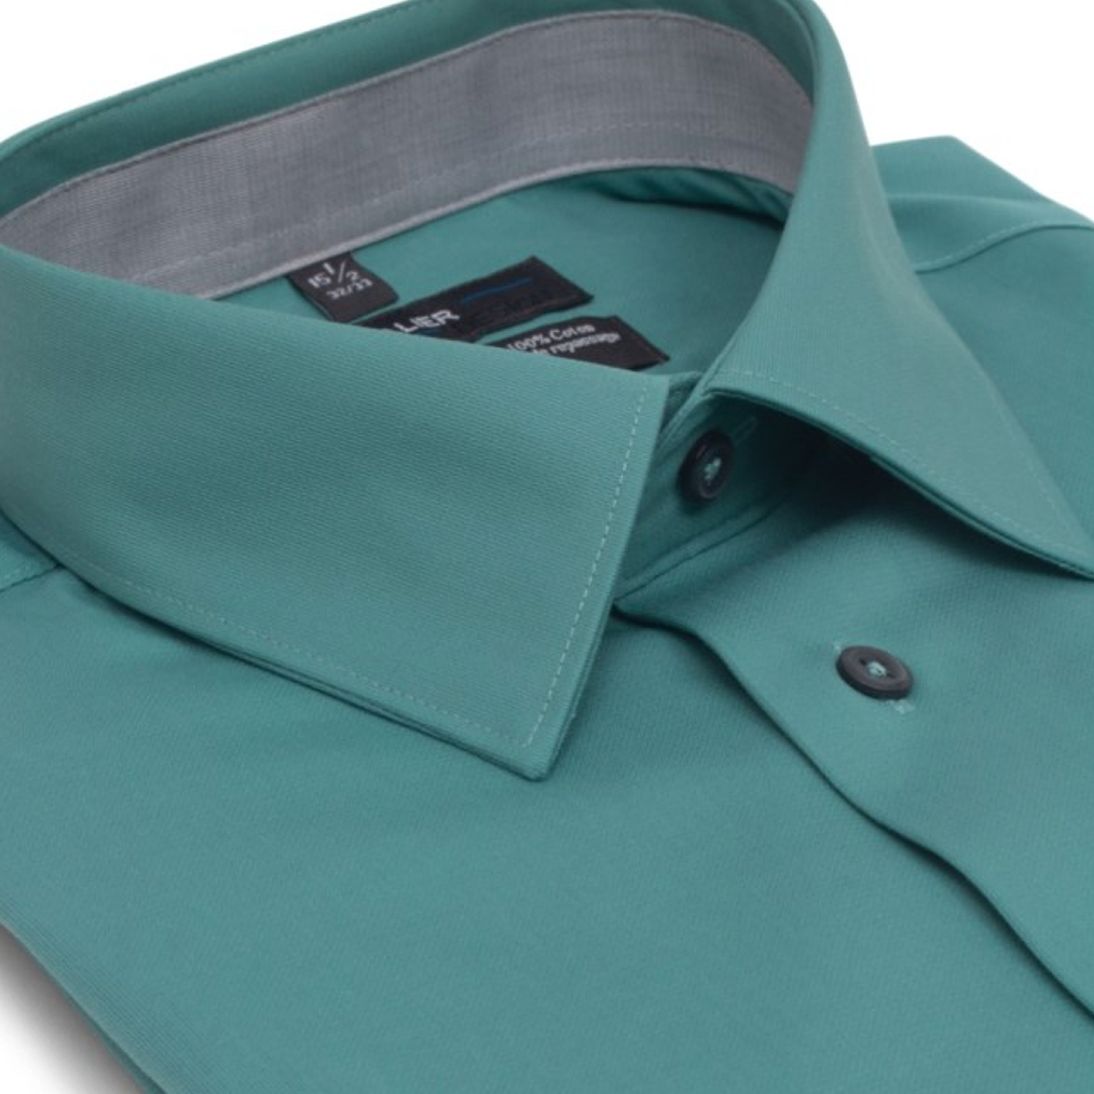 No-Iron Cotton Dress Shirt with Spread Collar in Green (Regular Fit) by Leo Chevalier